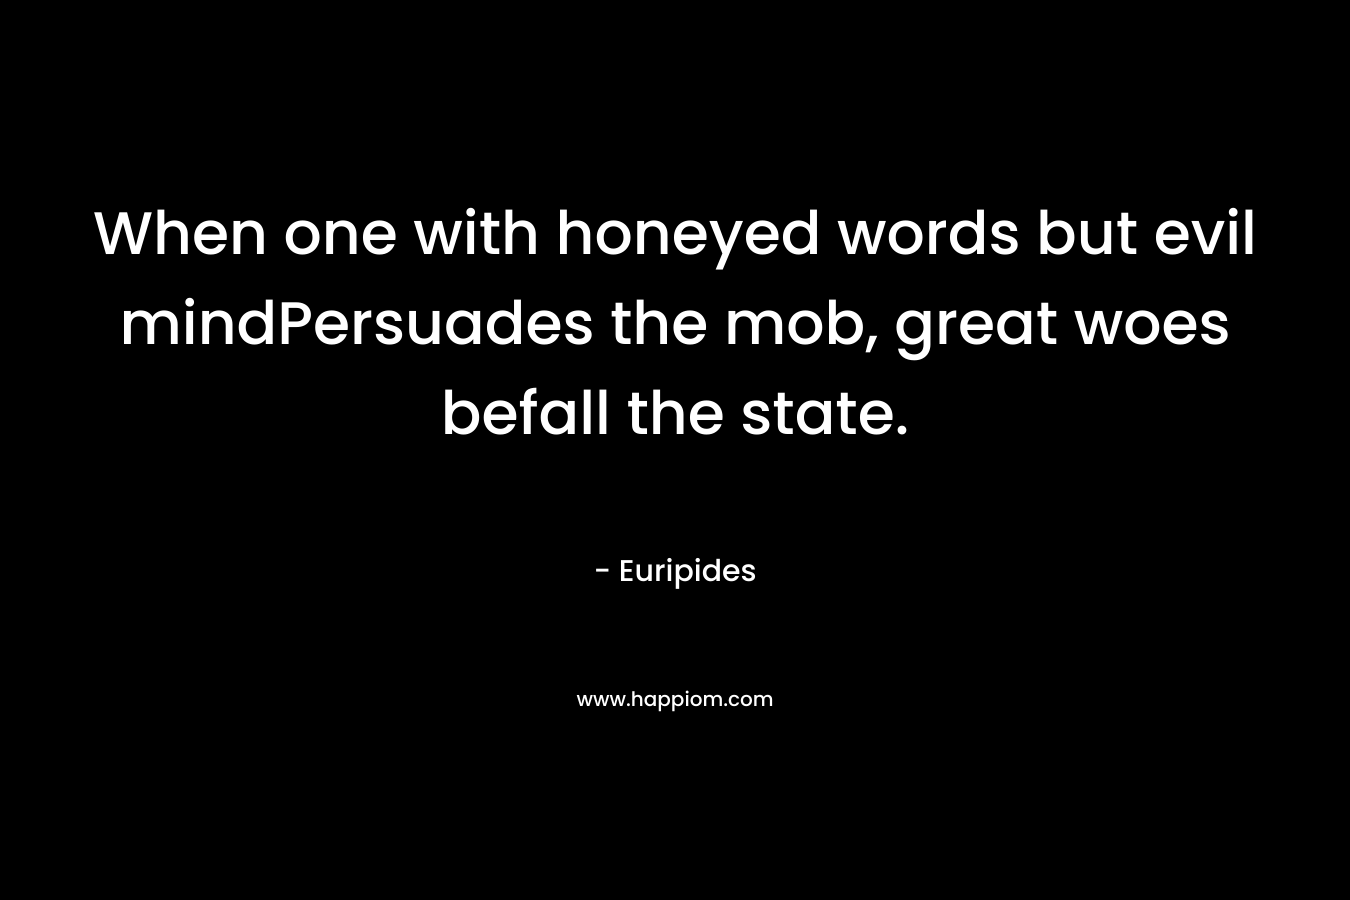 When one with honeyed words but evil mindPersuades the mob, great woes befall the state. – Euripides